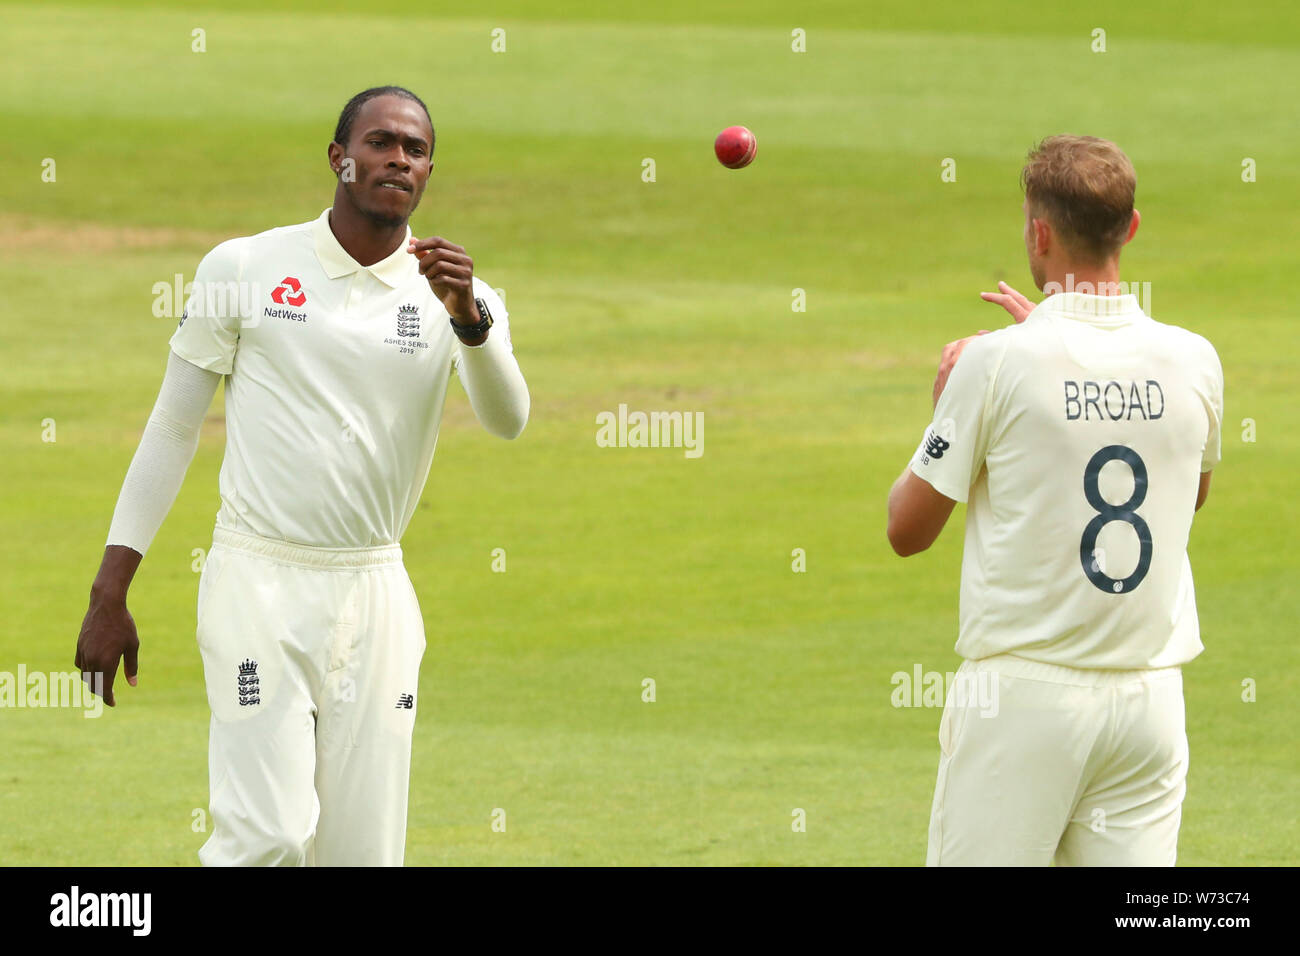 BIRMINGHAM, ENGLAND. 04 AUGUST 2019: Substitute fielder Jofra Archer and Stuart Broad of England during day 3 of the 1st Specsavers Ashes Test Match, at Edgbaston Cricket Ground, Birmingham, England. Stock Photo